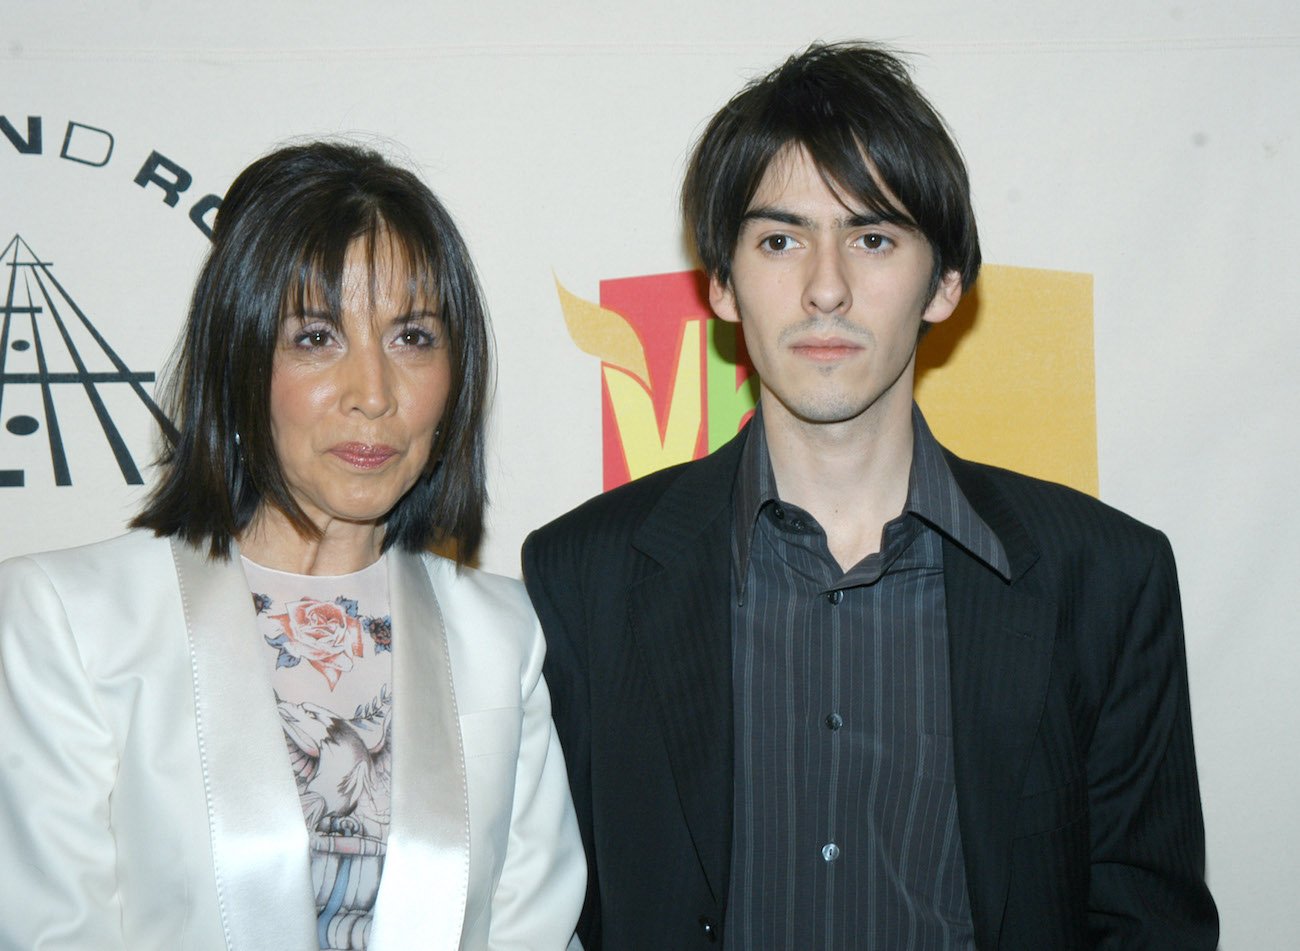 George Harrison's wife, Olivia, and their son, Dhani, at the 2004 Rock & Roll Hall of Fame inductions. 